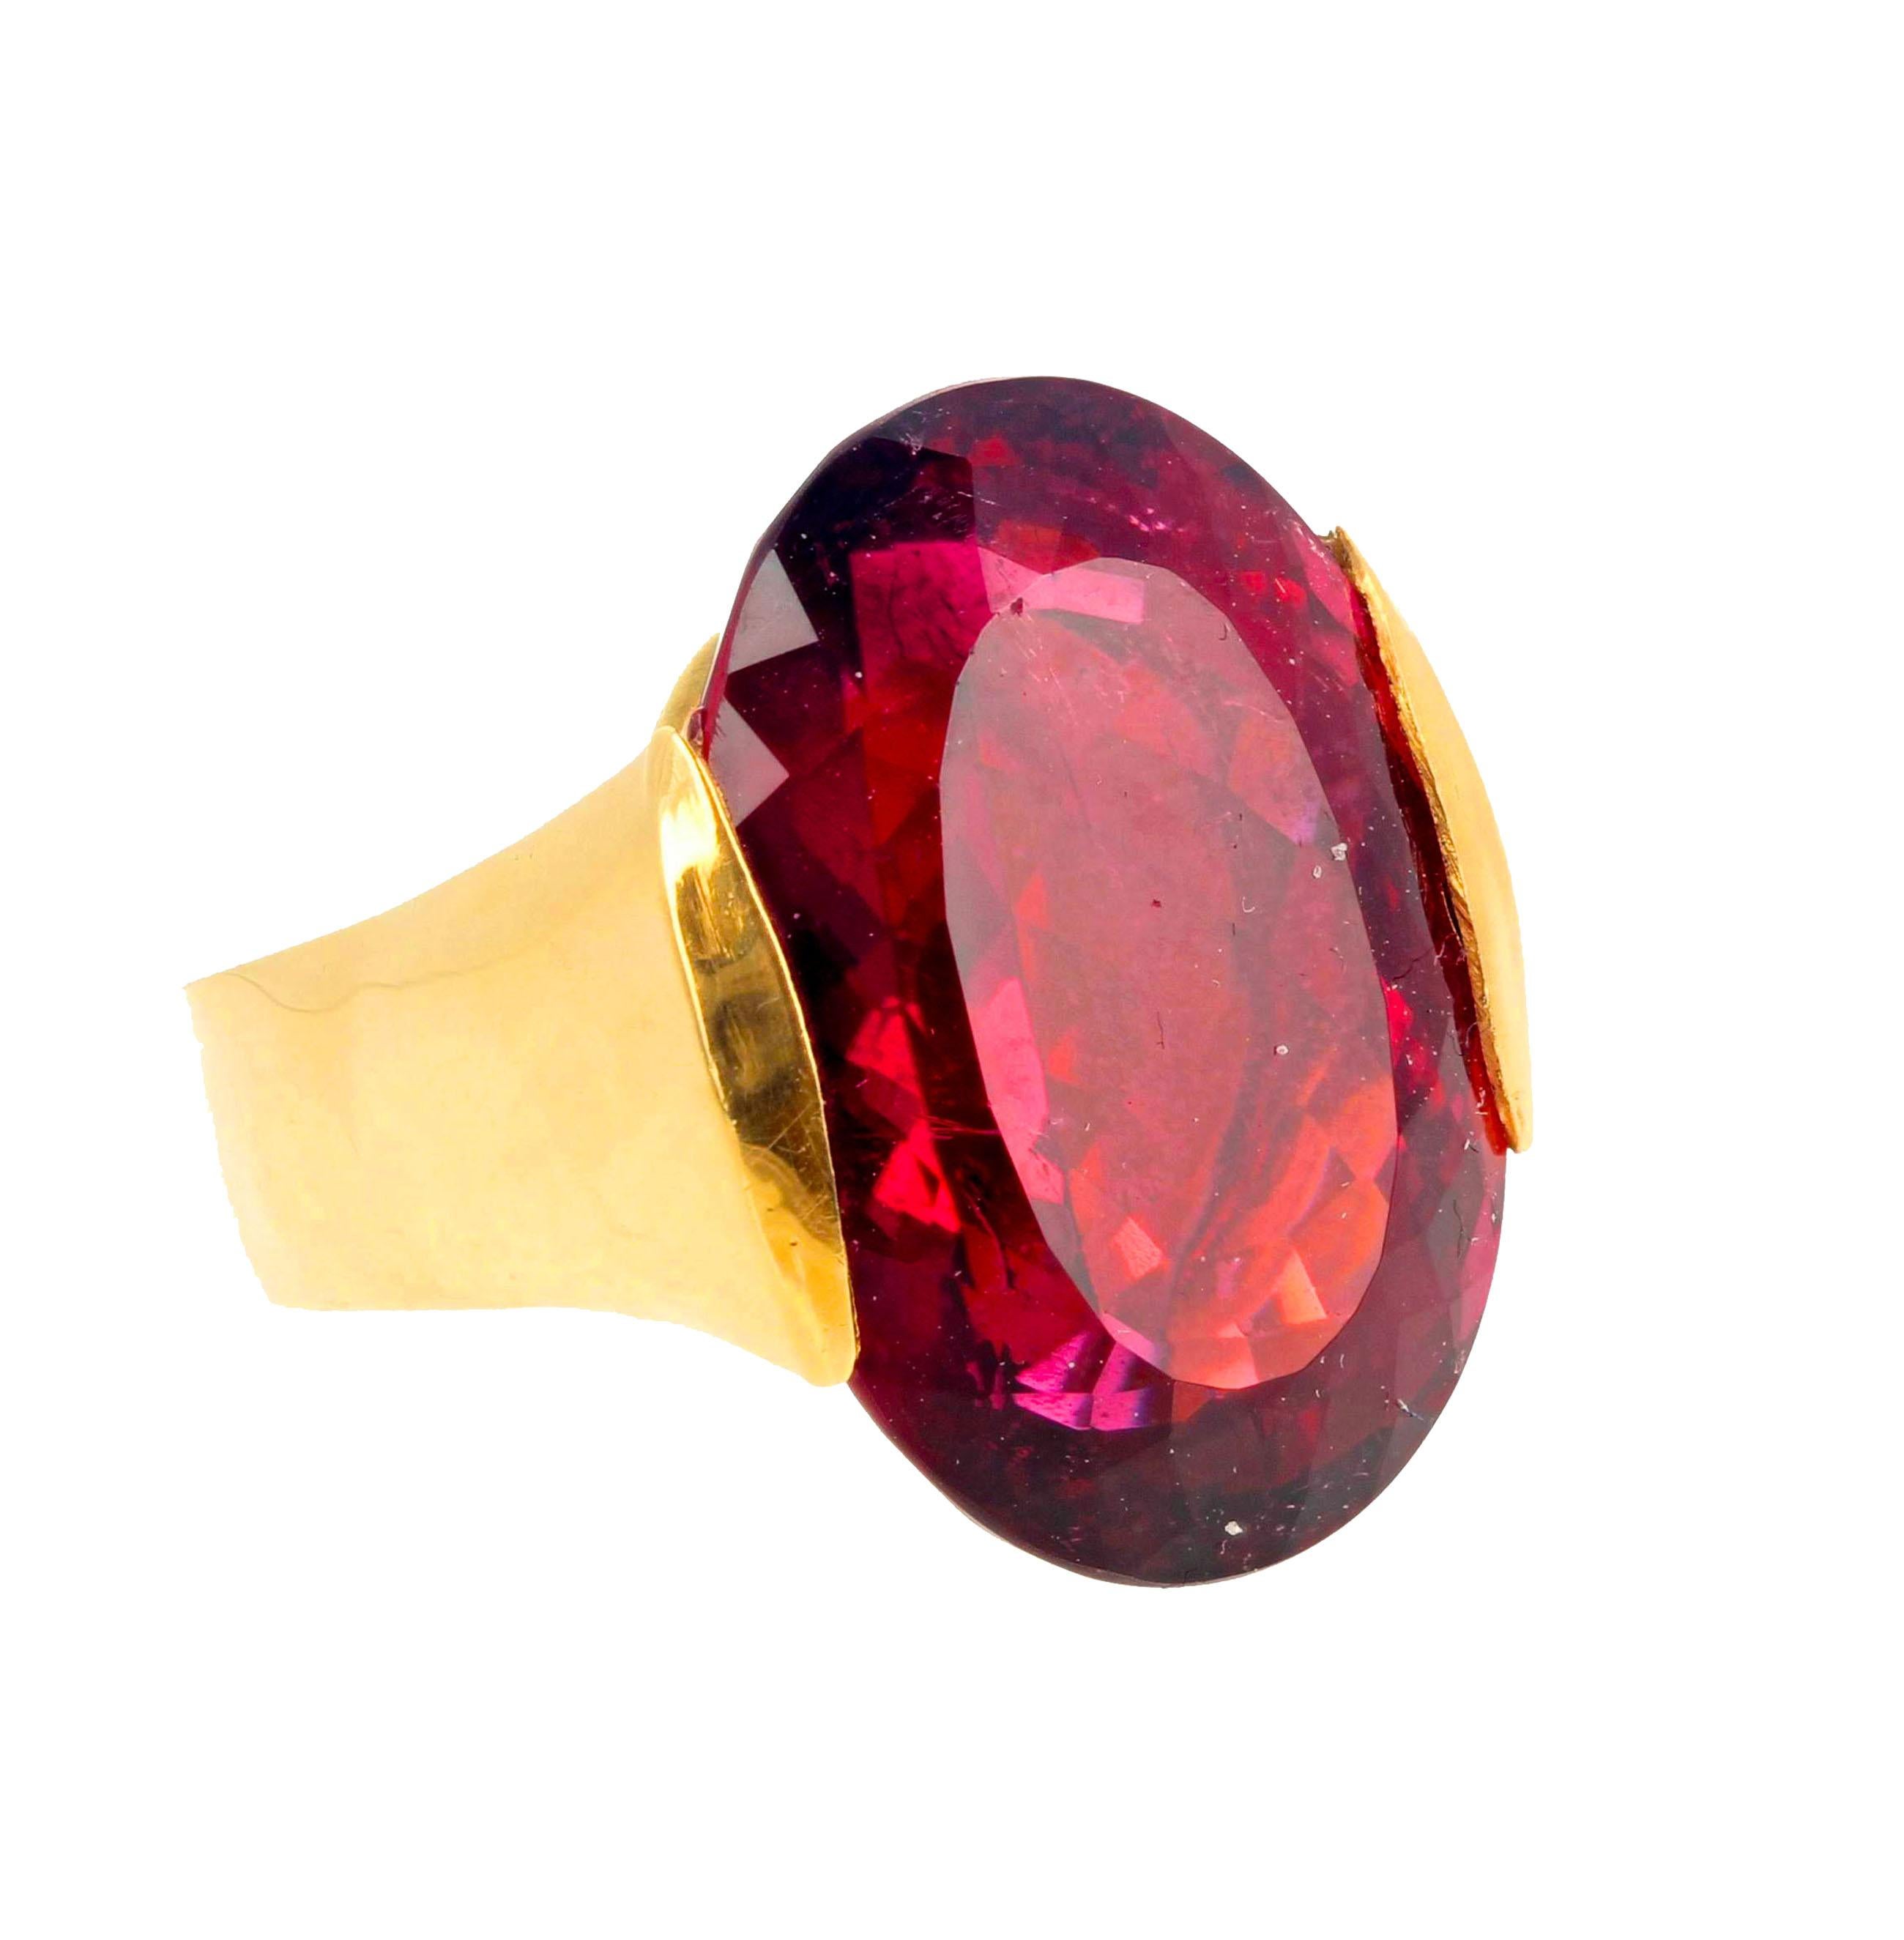 This solitaire gemstone is large enough to see from the moon.  This deep bright glowing natural Red Rubelite Tourmaline is set in this sizable 18KT yellow gold ring size 5 (sizable for free).  This is not a ring for the shy, it makes a surprisingly